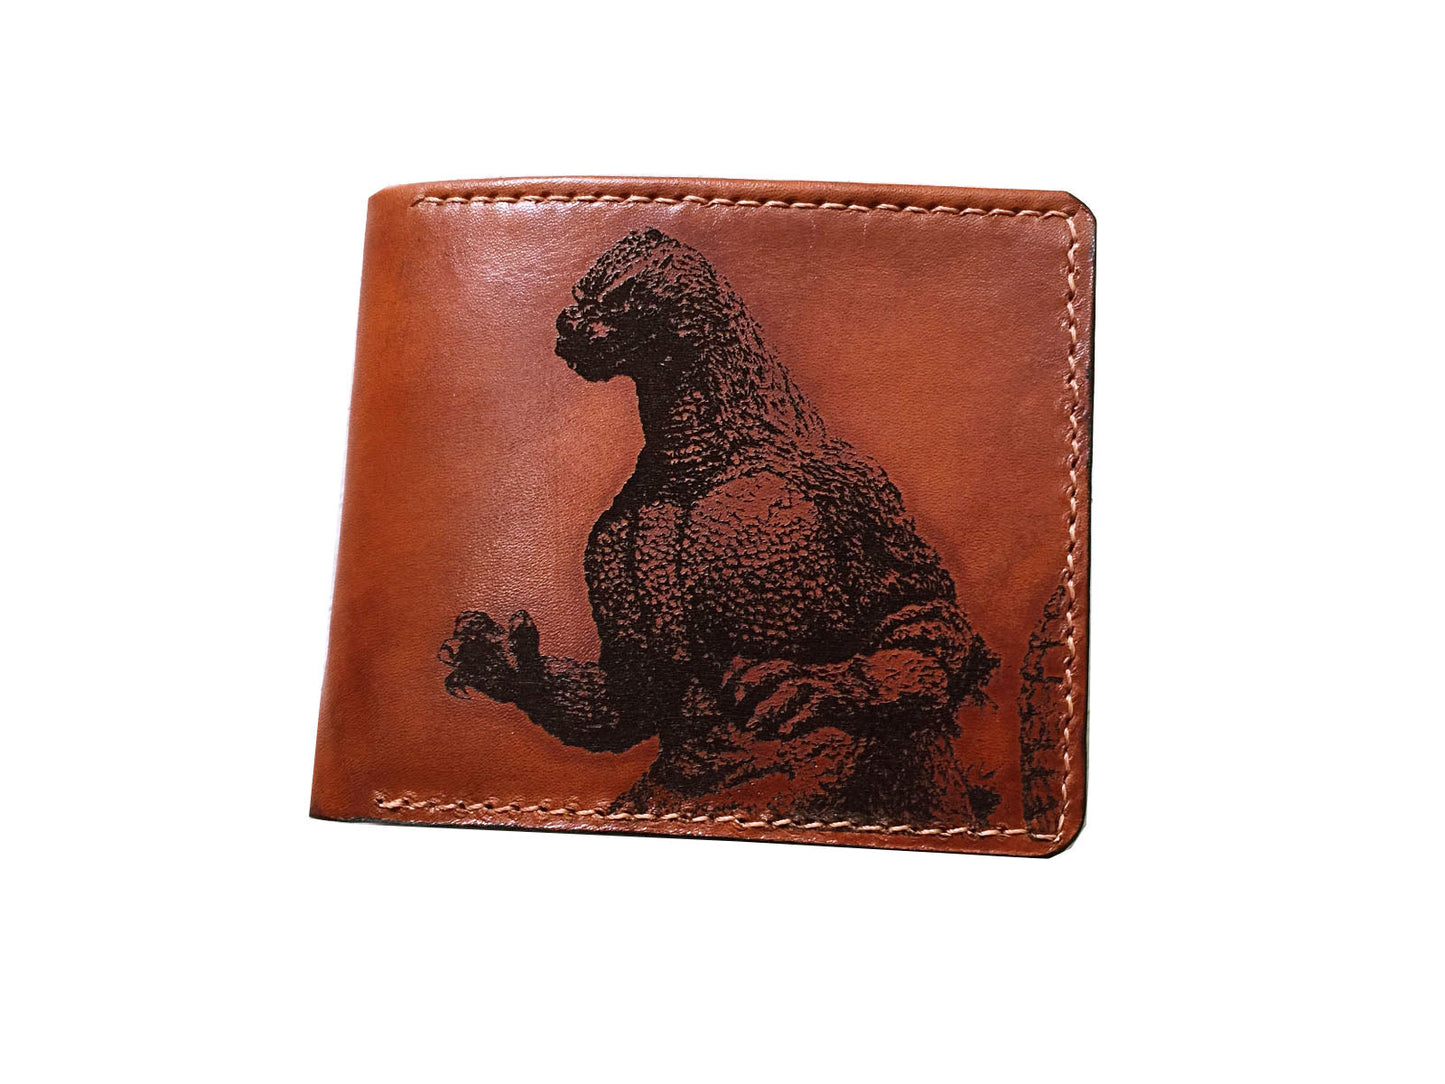 Mayan Corner - Mechagodzilla leather bifold wallet, customized leather gift for him, monster leather wallet